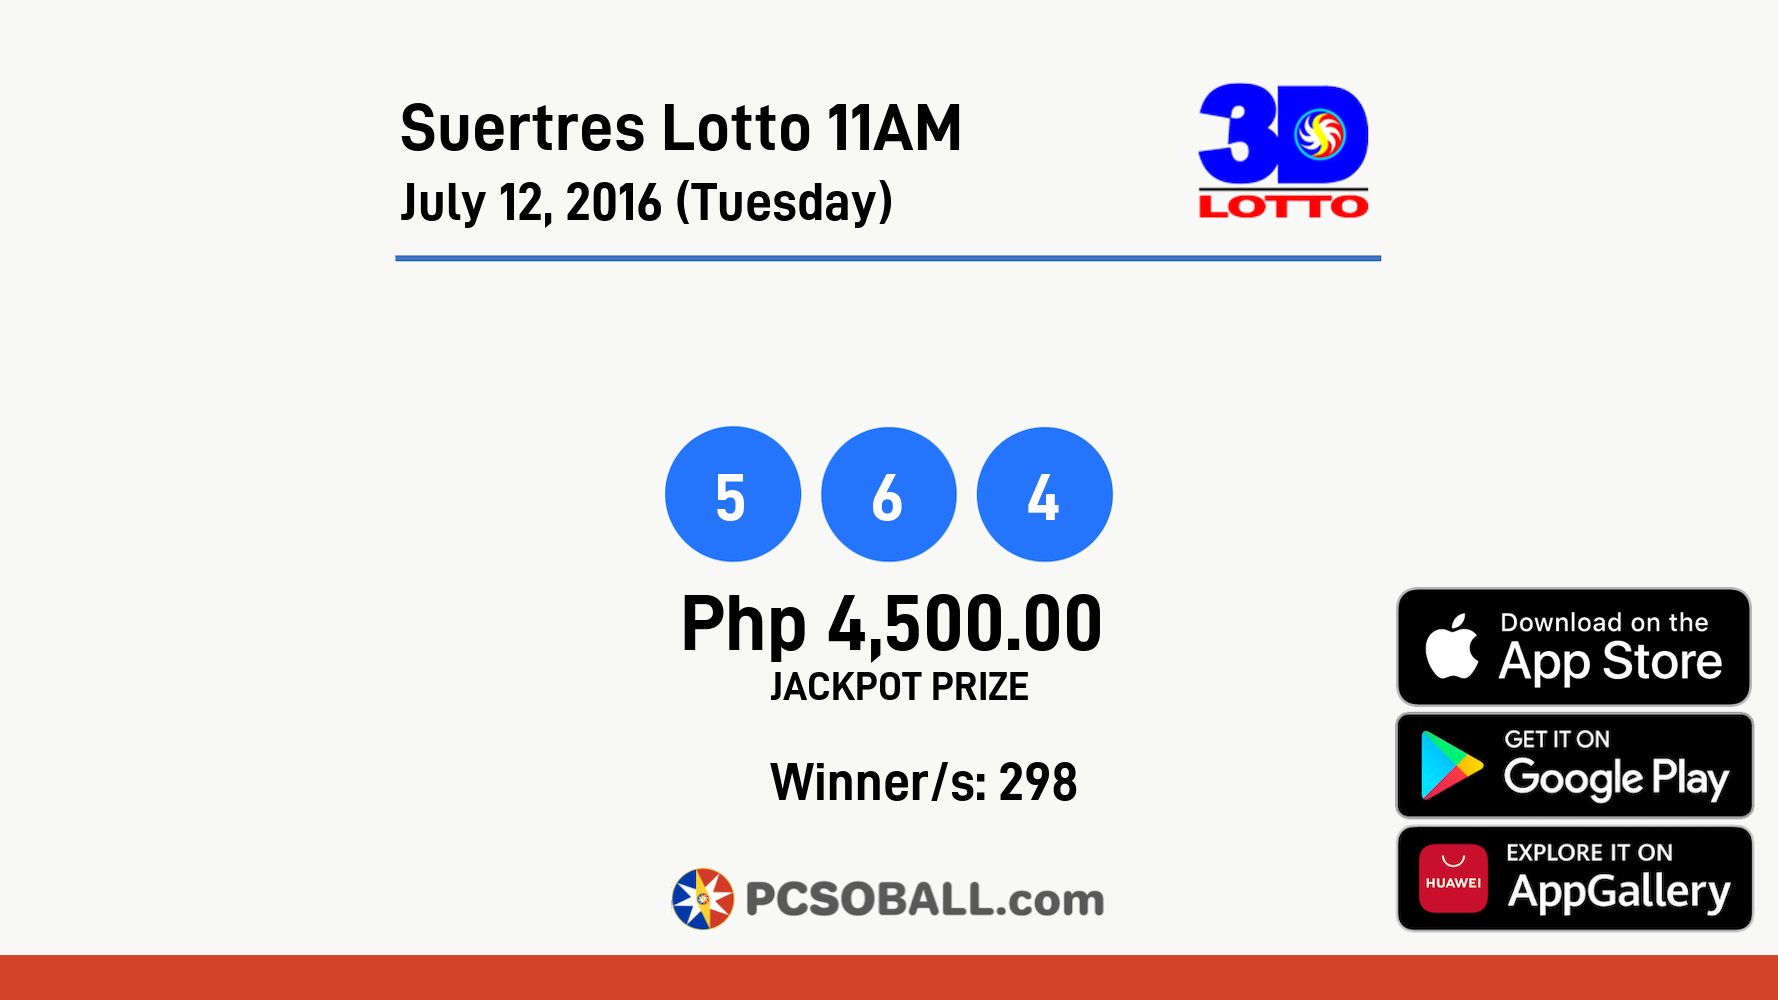 Suertres Lotto 11AM July 12, 2016 (Tuesday) Result